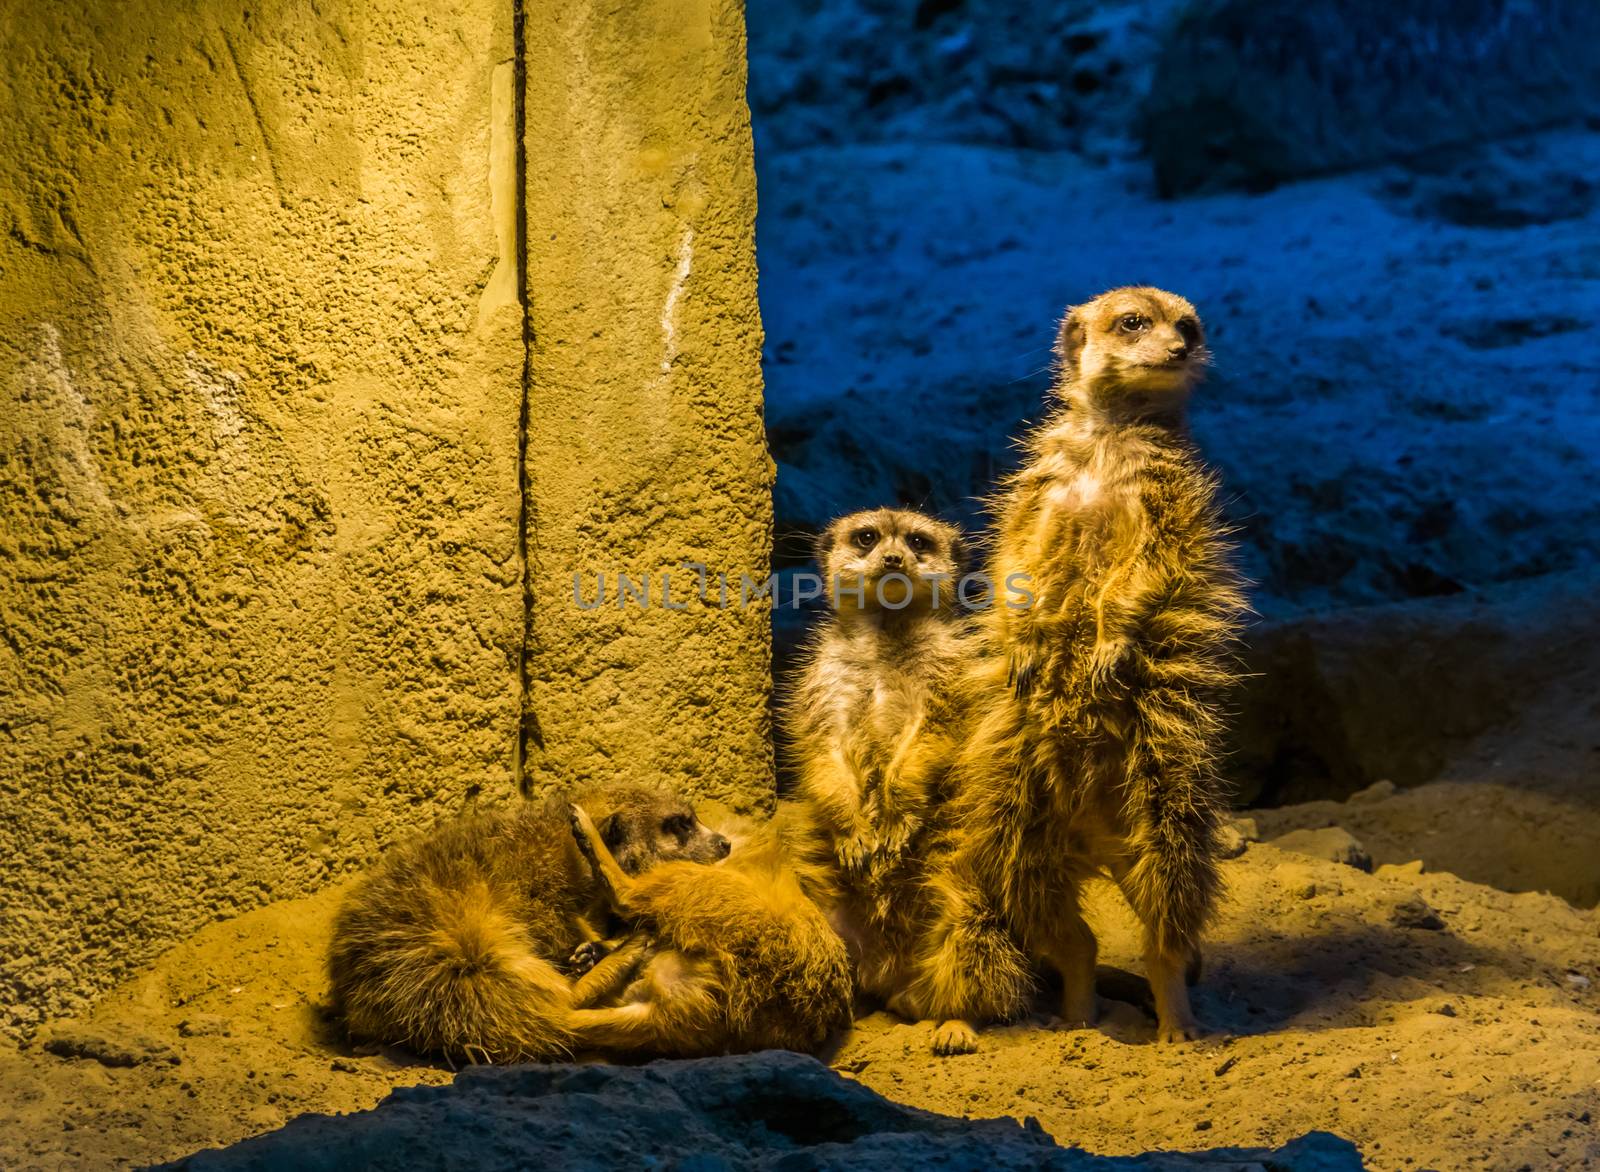 cute family portrait of meerkats together, two standing and two playing on the ground, popular zoo animals and pets by charlottebleijenberg